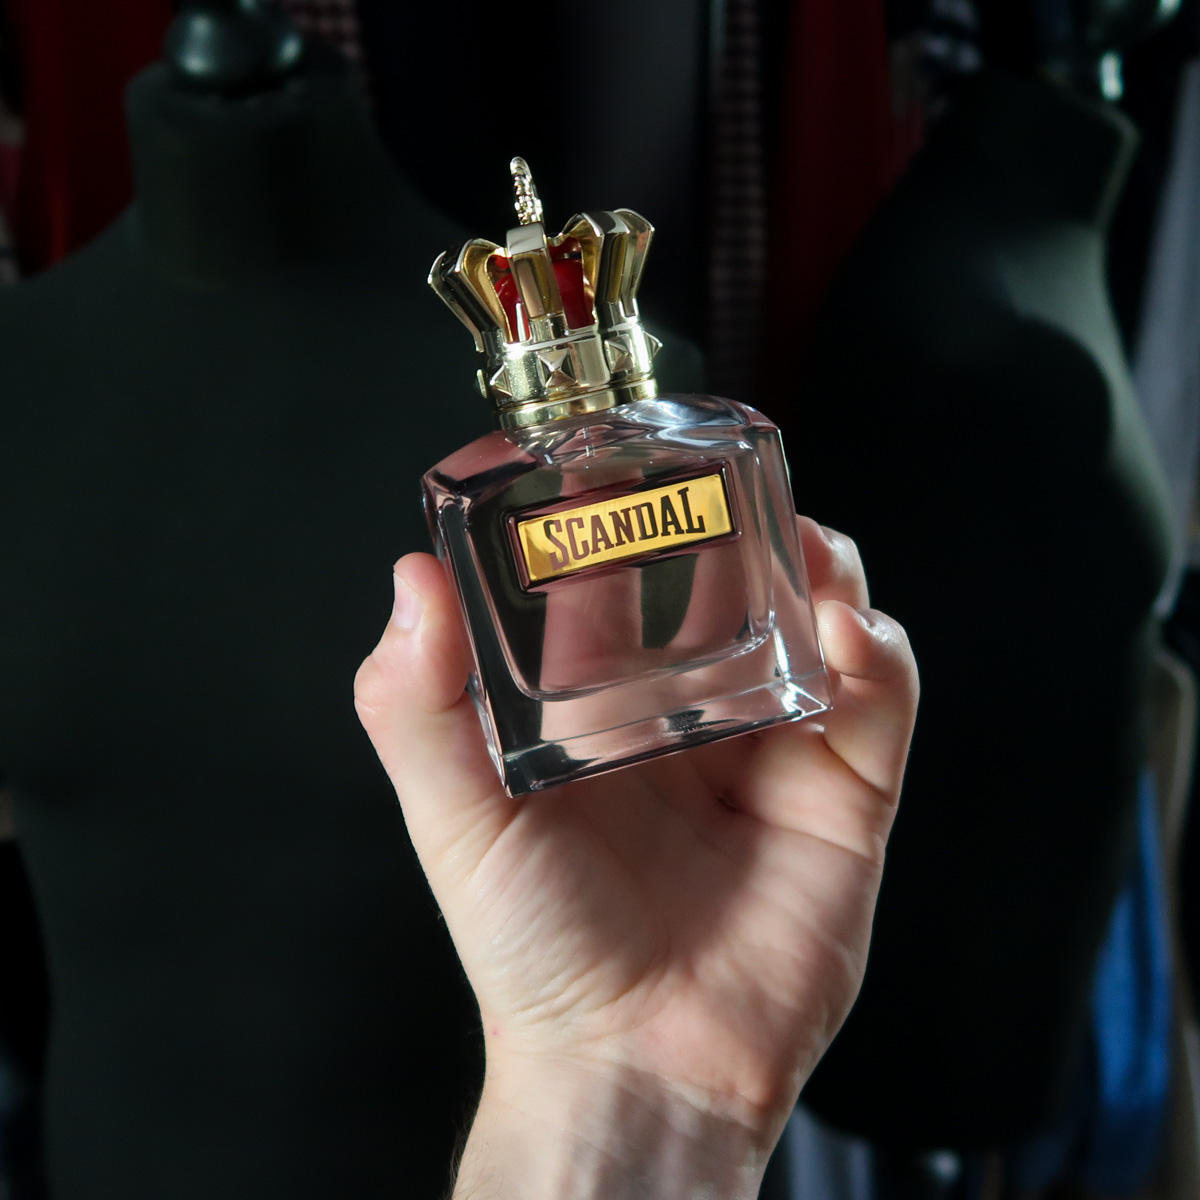 More Man for your Money - Jean Paul Gaultier Ultra Male - Escentual's Blog